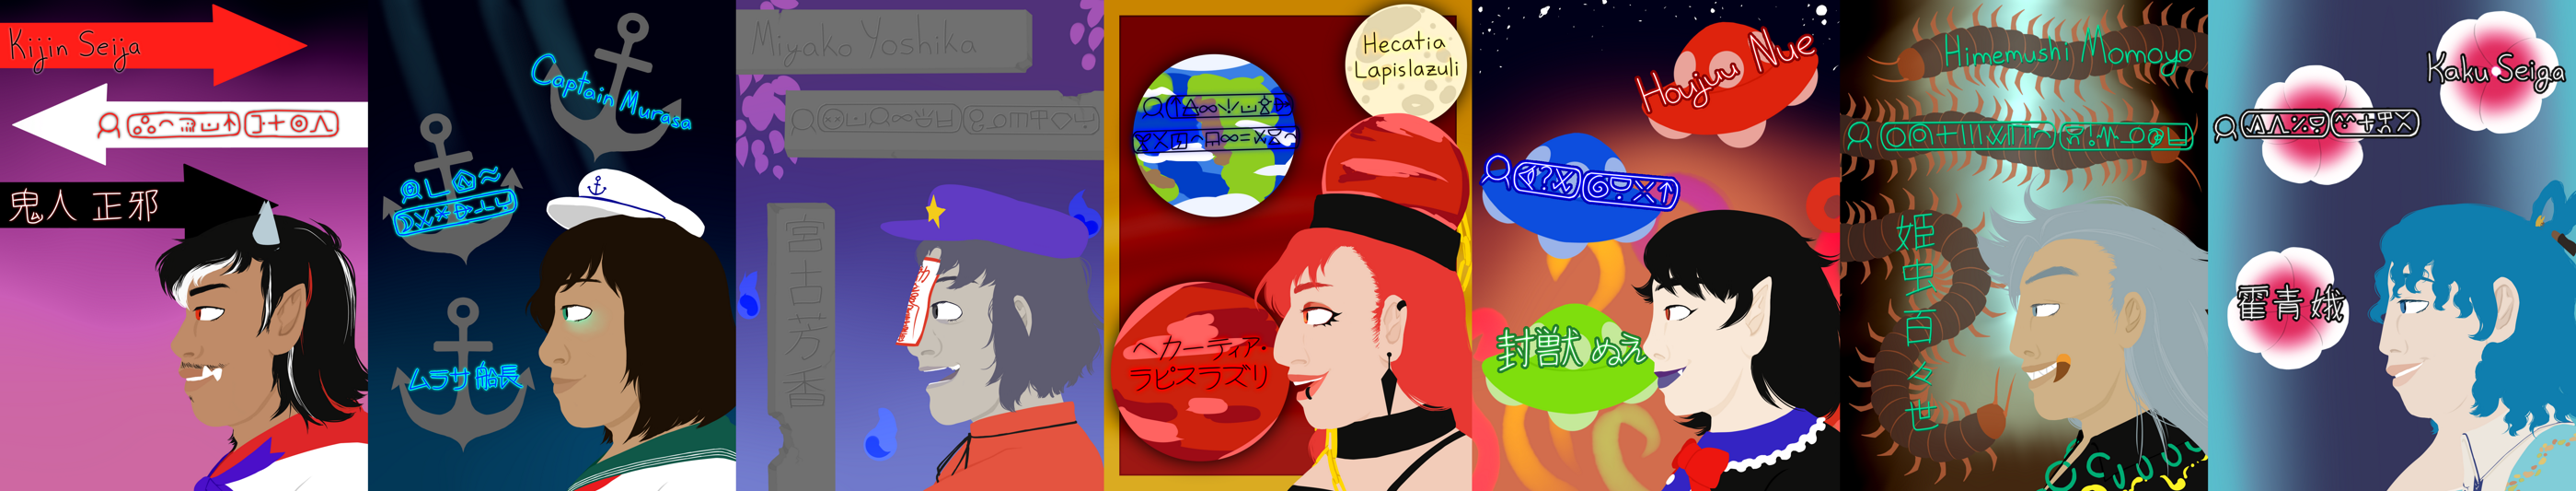 7 poster-styled drawings of Touhou characters. their names are written in the Latin alphabet, sitelen pona, and Japanese near them, with an item themed after them behind each name. The backgrounds are themed after the characters as well